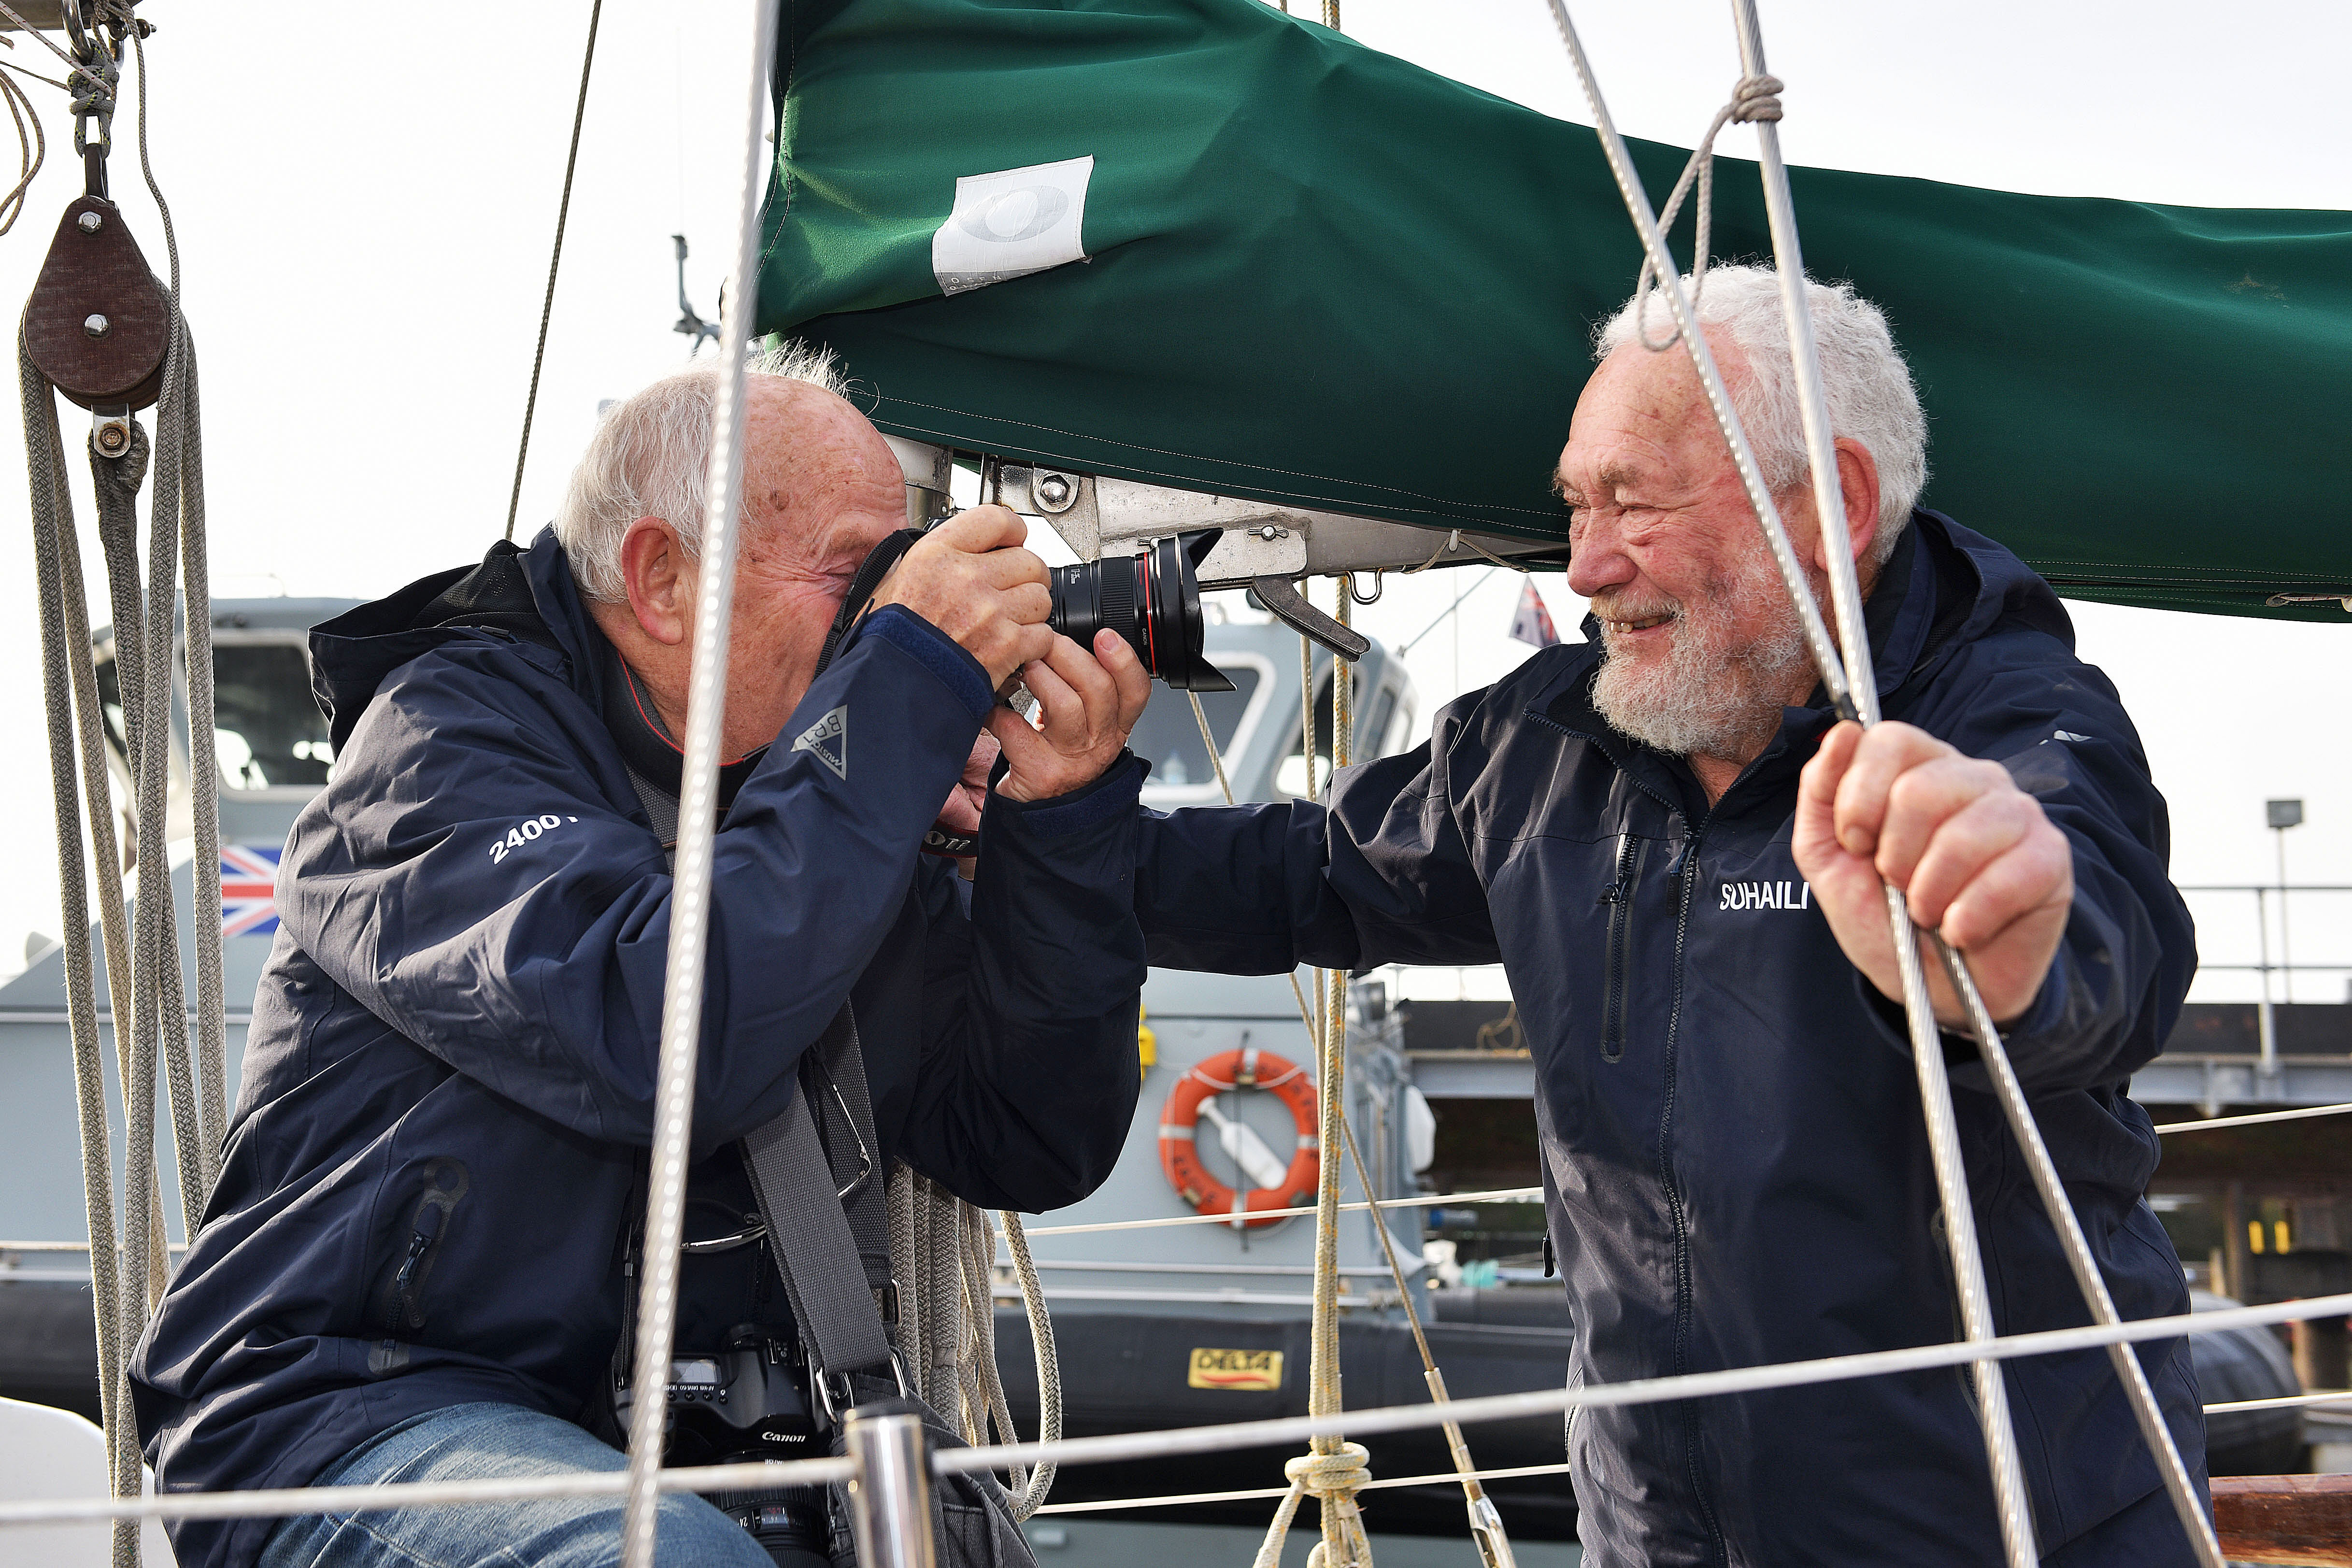 Photographer Bill Rowntree is in Falmouth after capturing Sir Robin's return 50 years ago